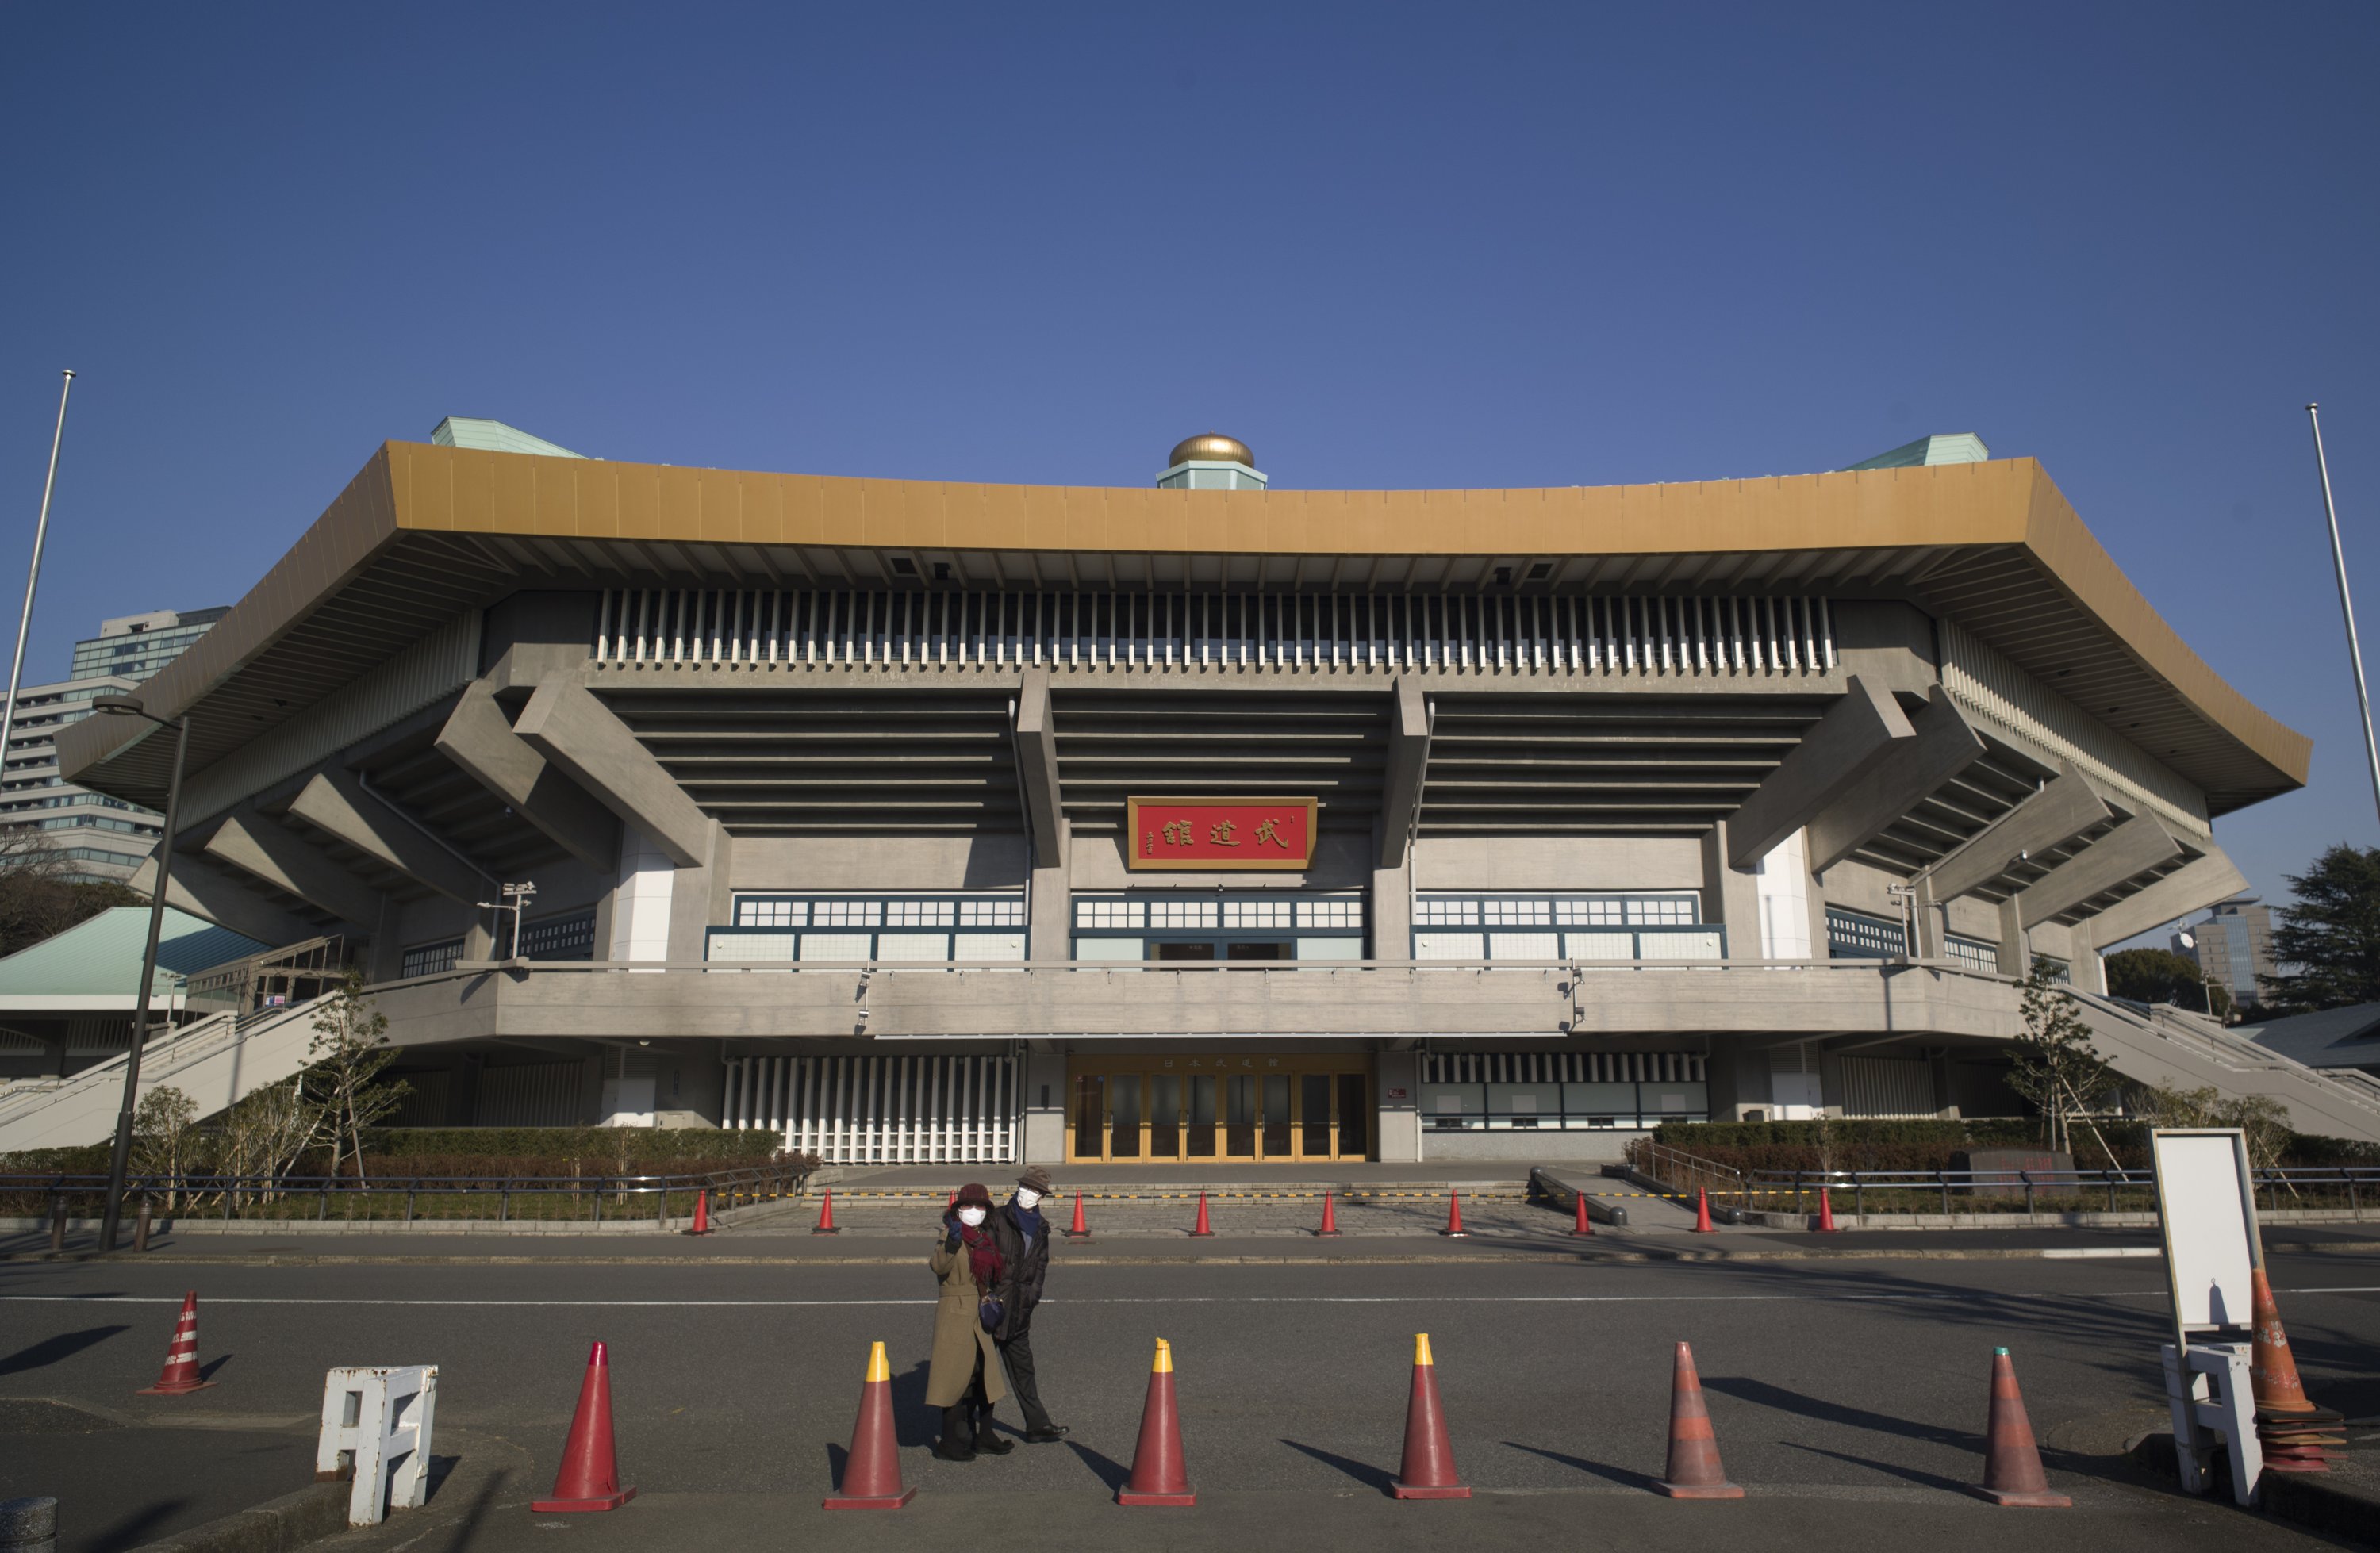 A man and a woman walk past the Nippon Budokan arena, one of the venues planned to be used in the rescheduled Tokyo Olympics, in Tokyo, Japan, Jan. 21, 2021. (AP Photo)